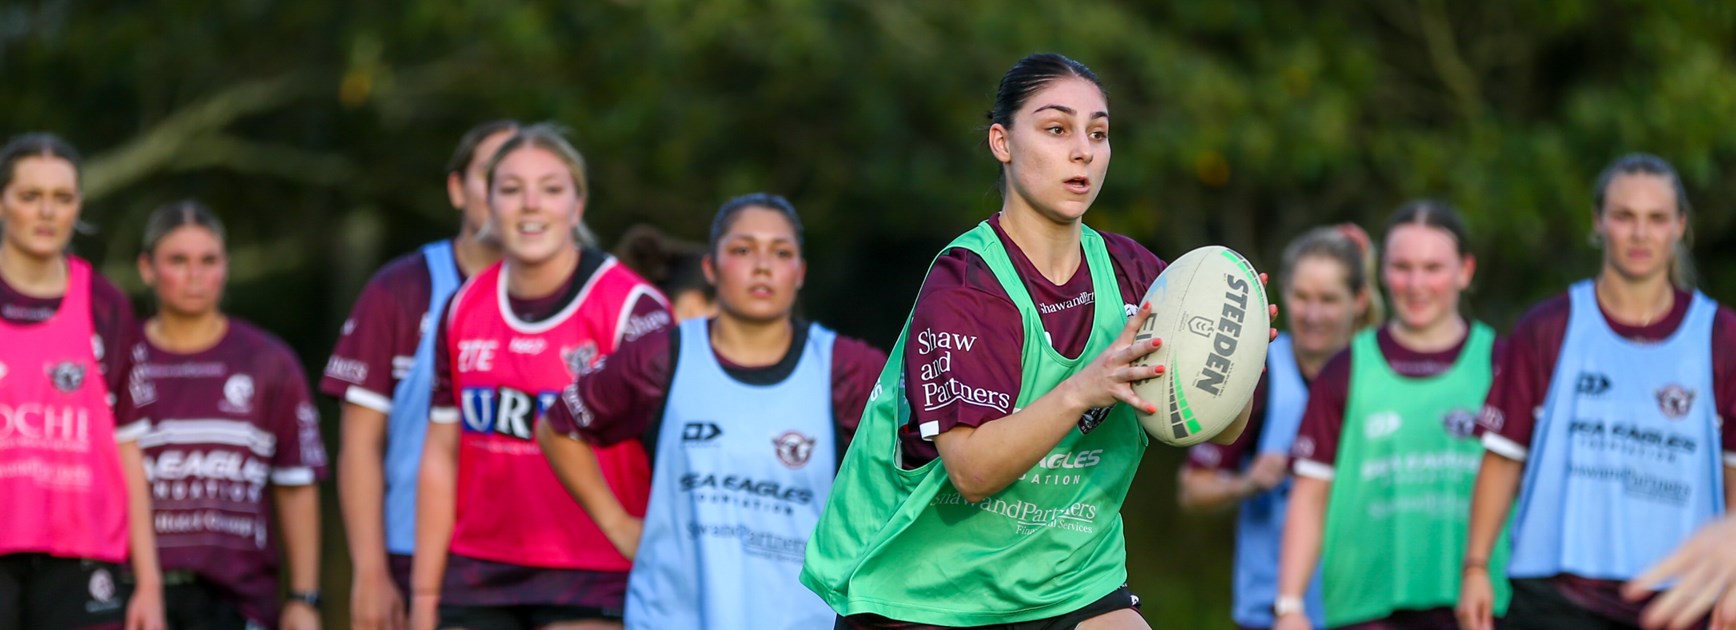 Billet families required for female Sea Eagles players